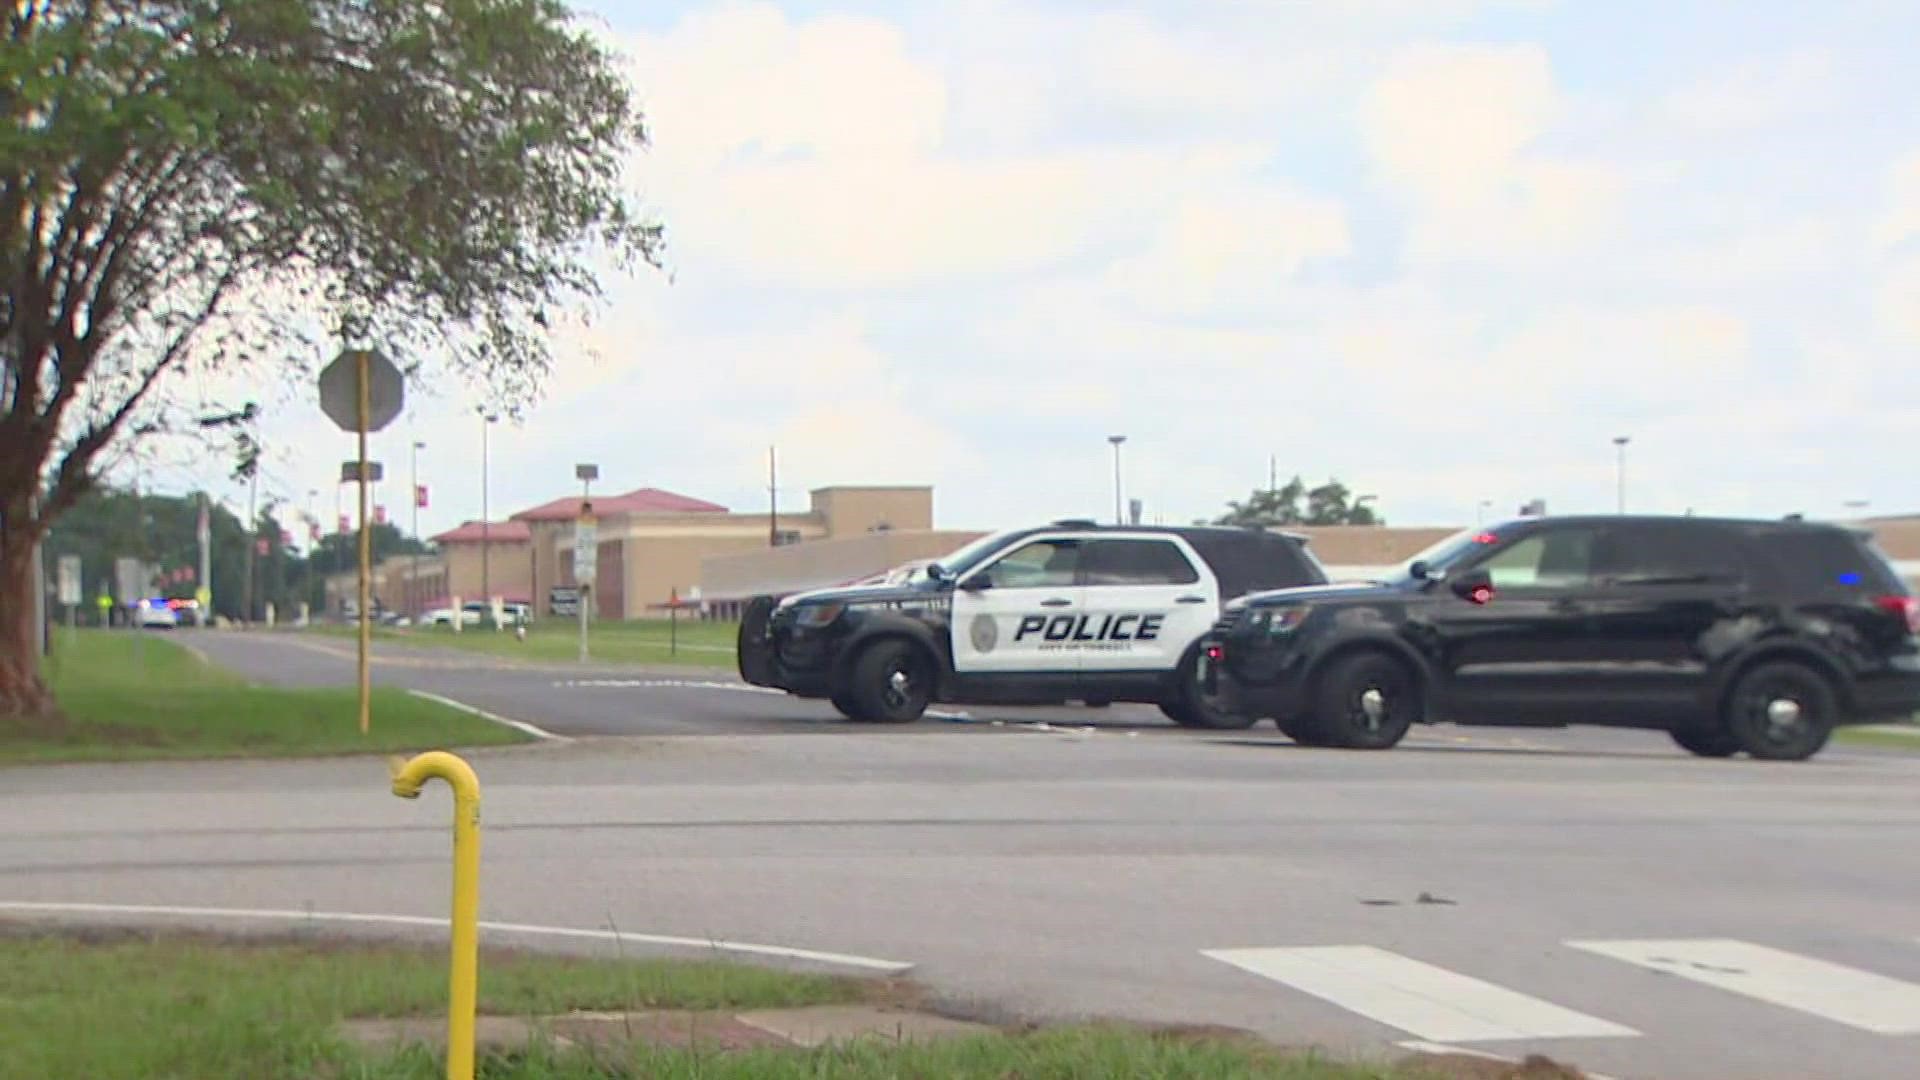 Tomball police confirm to KHOU 11 News they are working a bomb threat at Tomball High School.